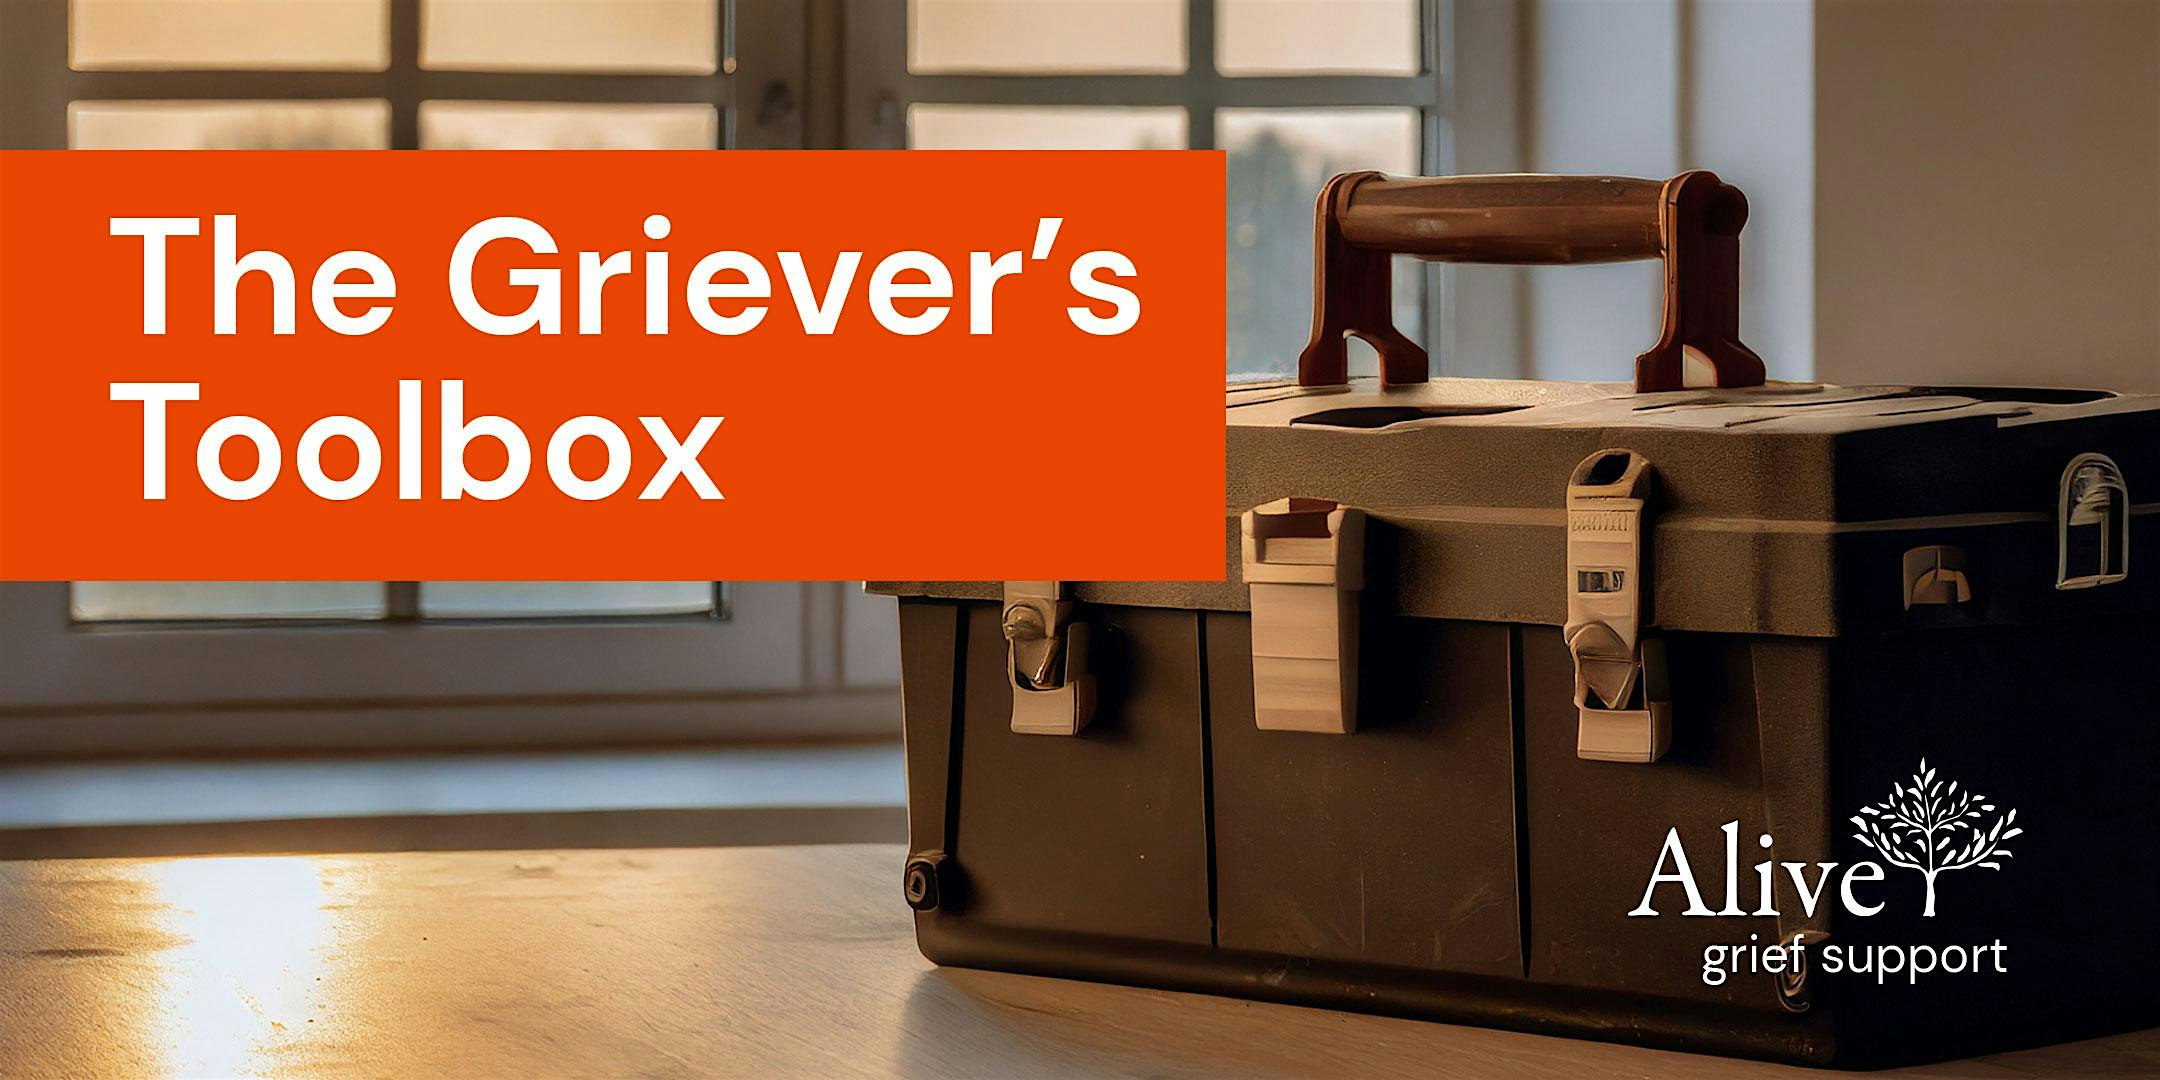 Griever’s Toolbox